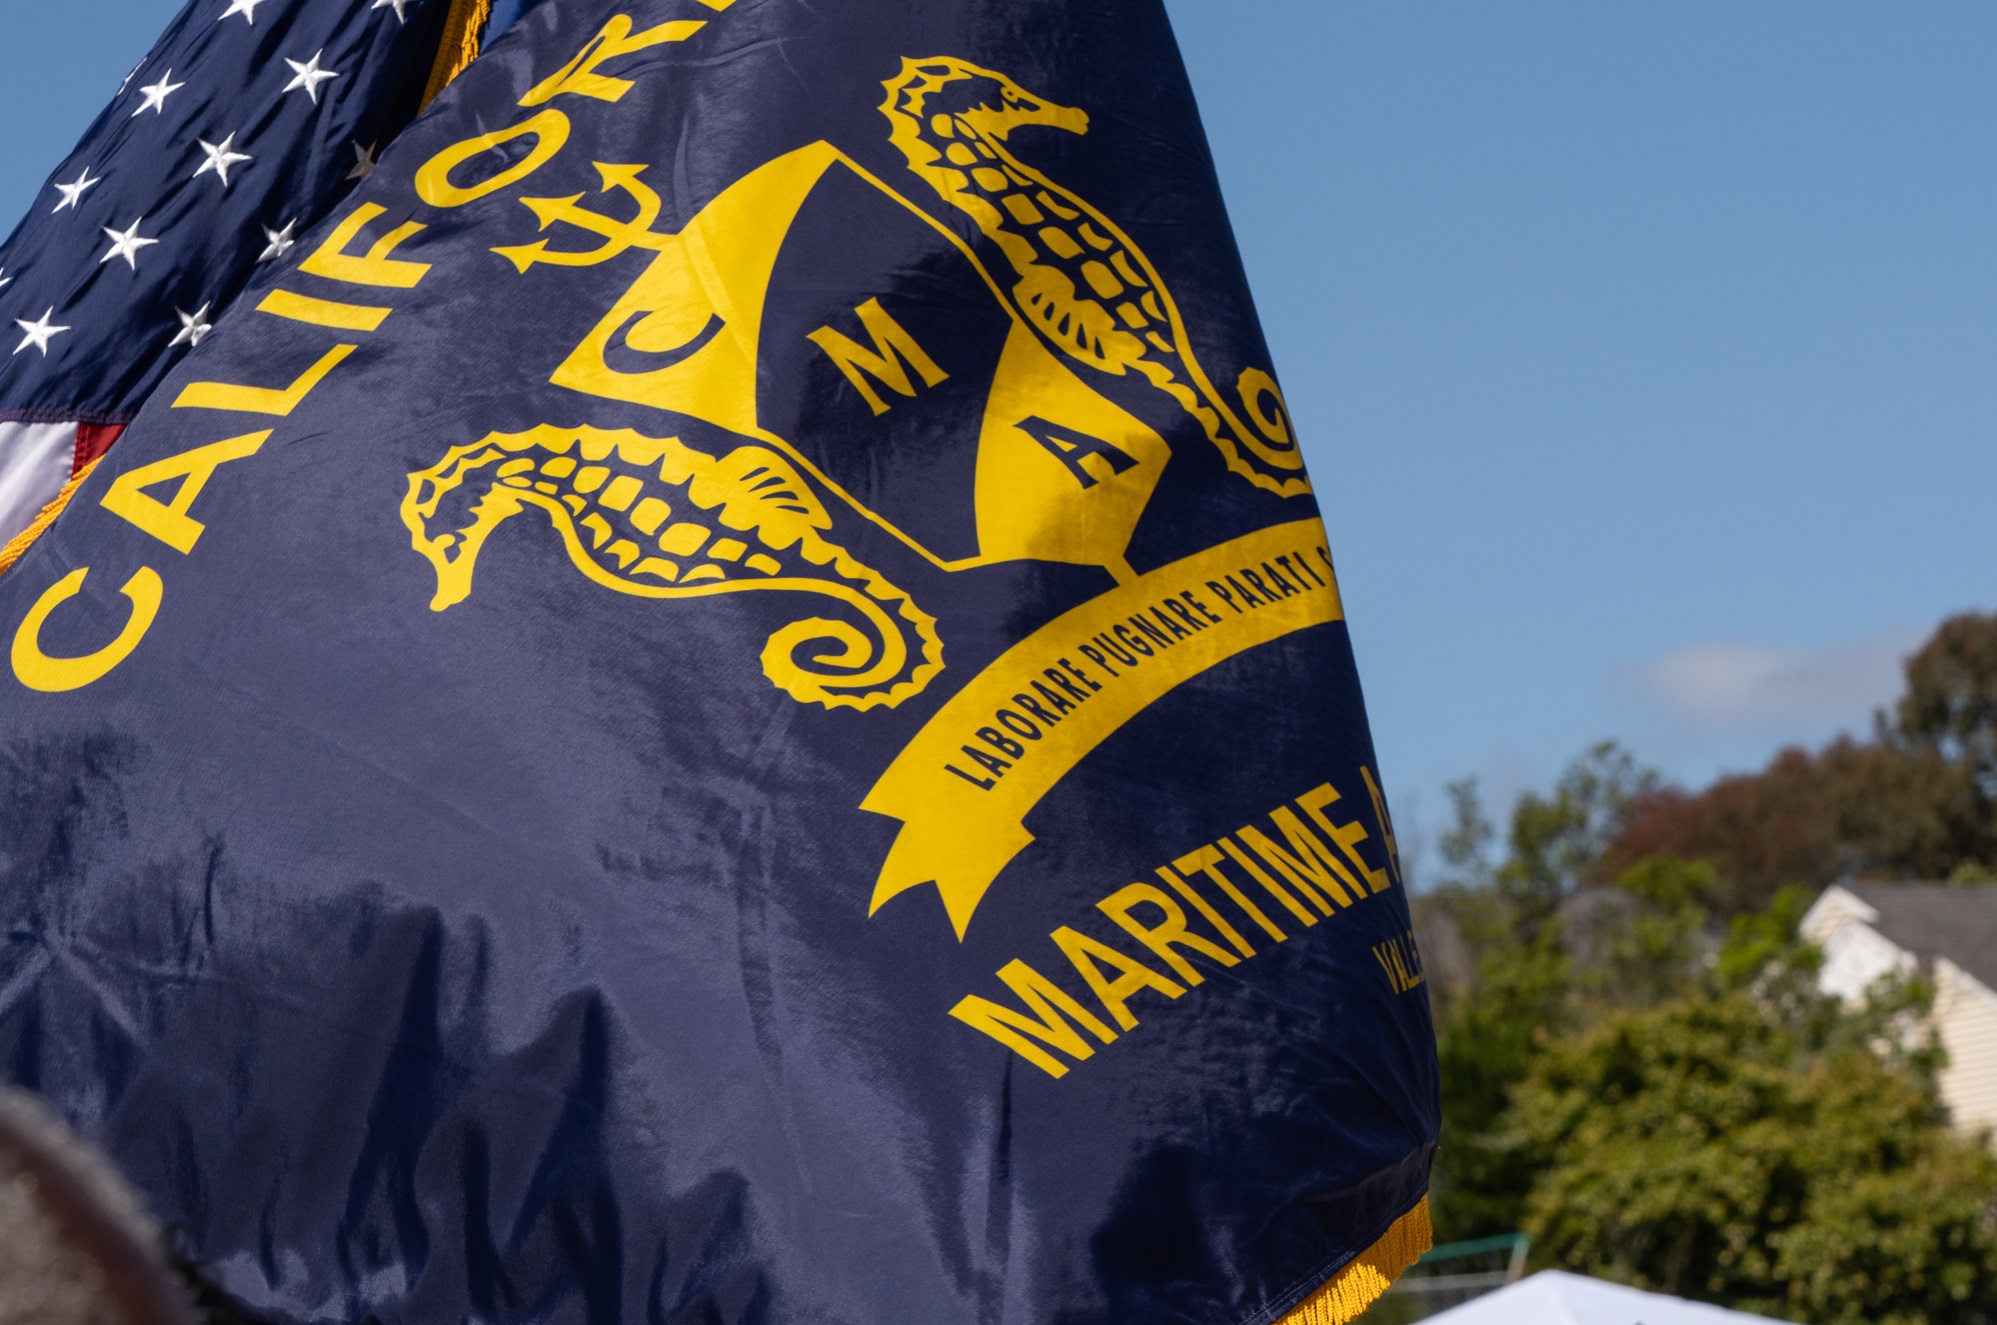 Cal Martime seal is shown on official flag